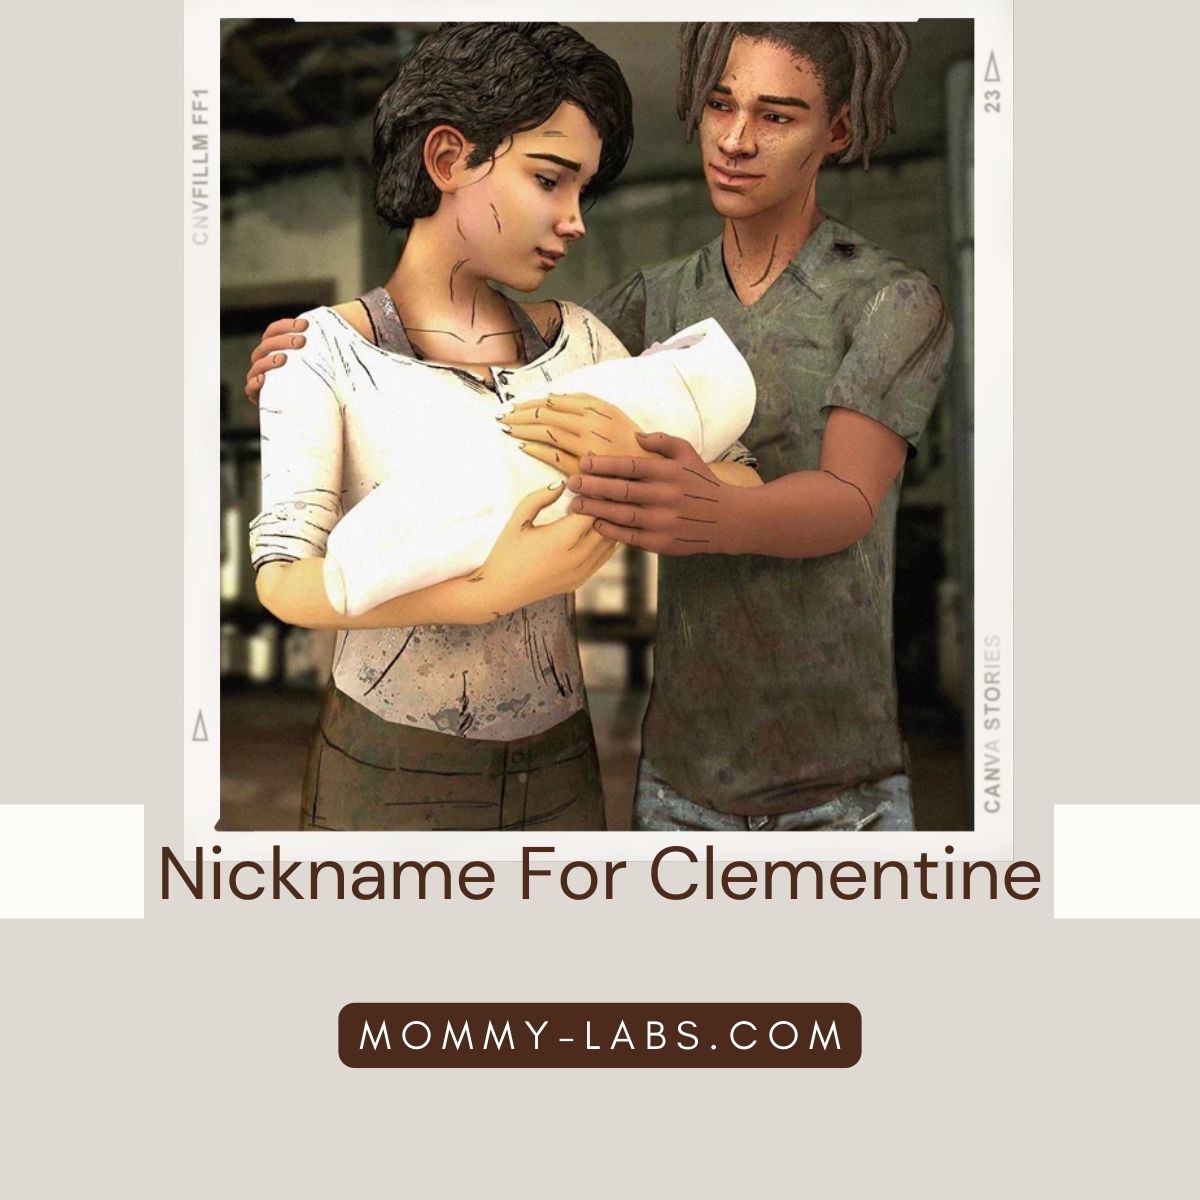 Nickname For Clementine